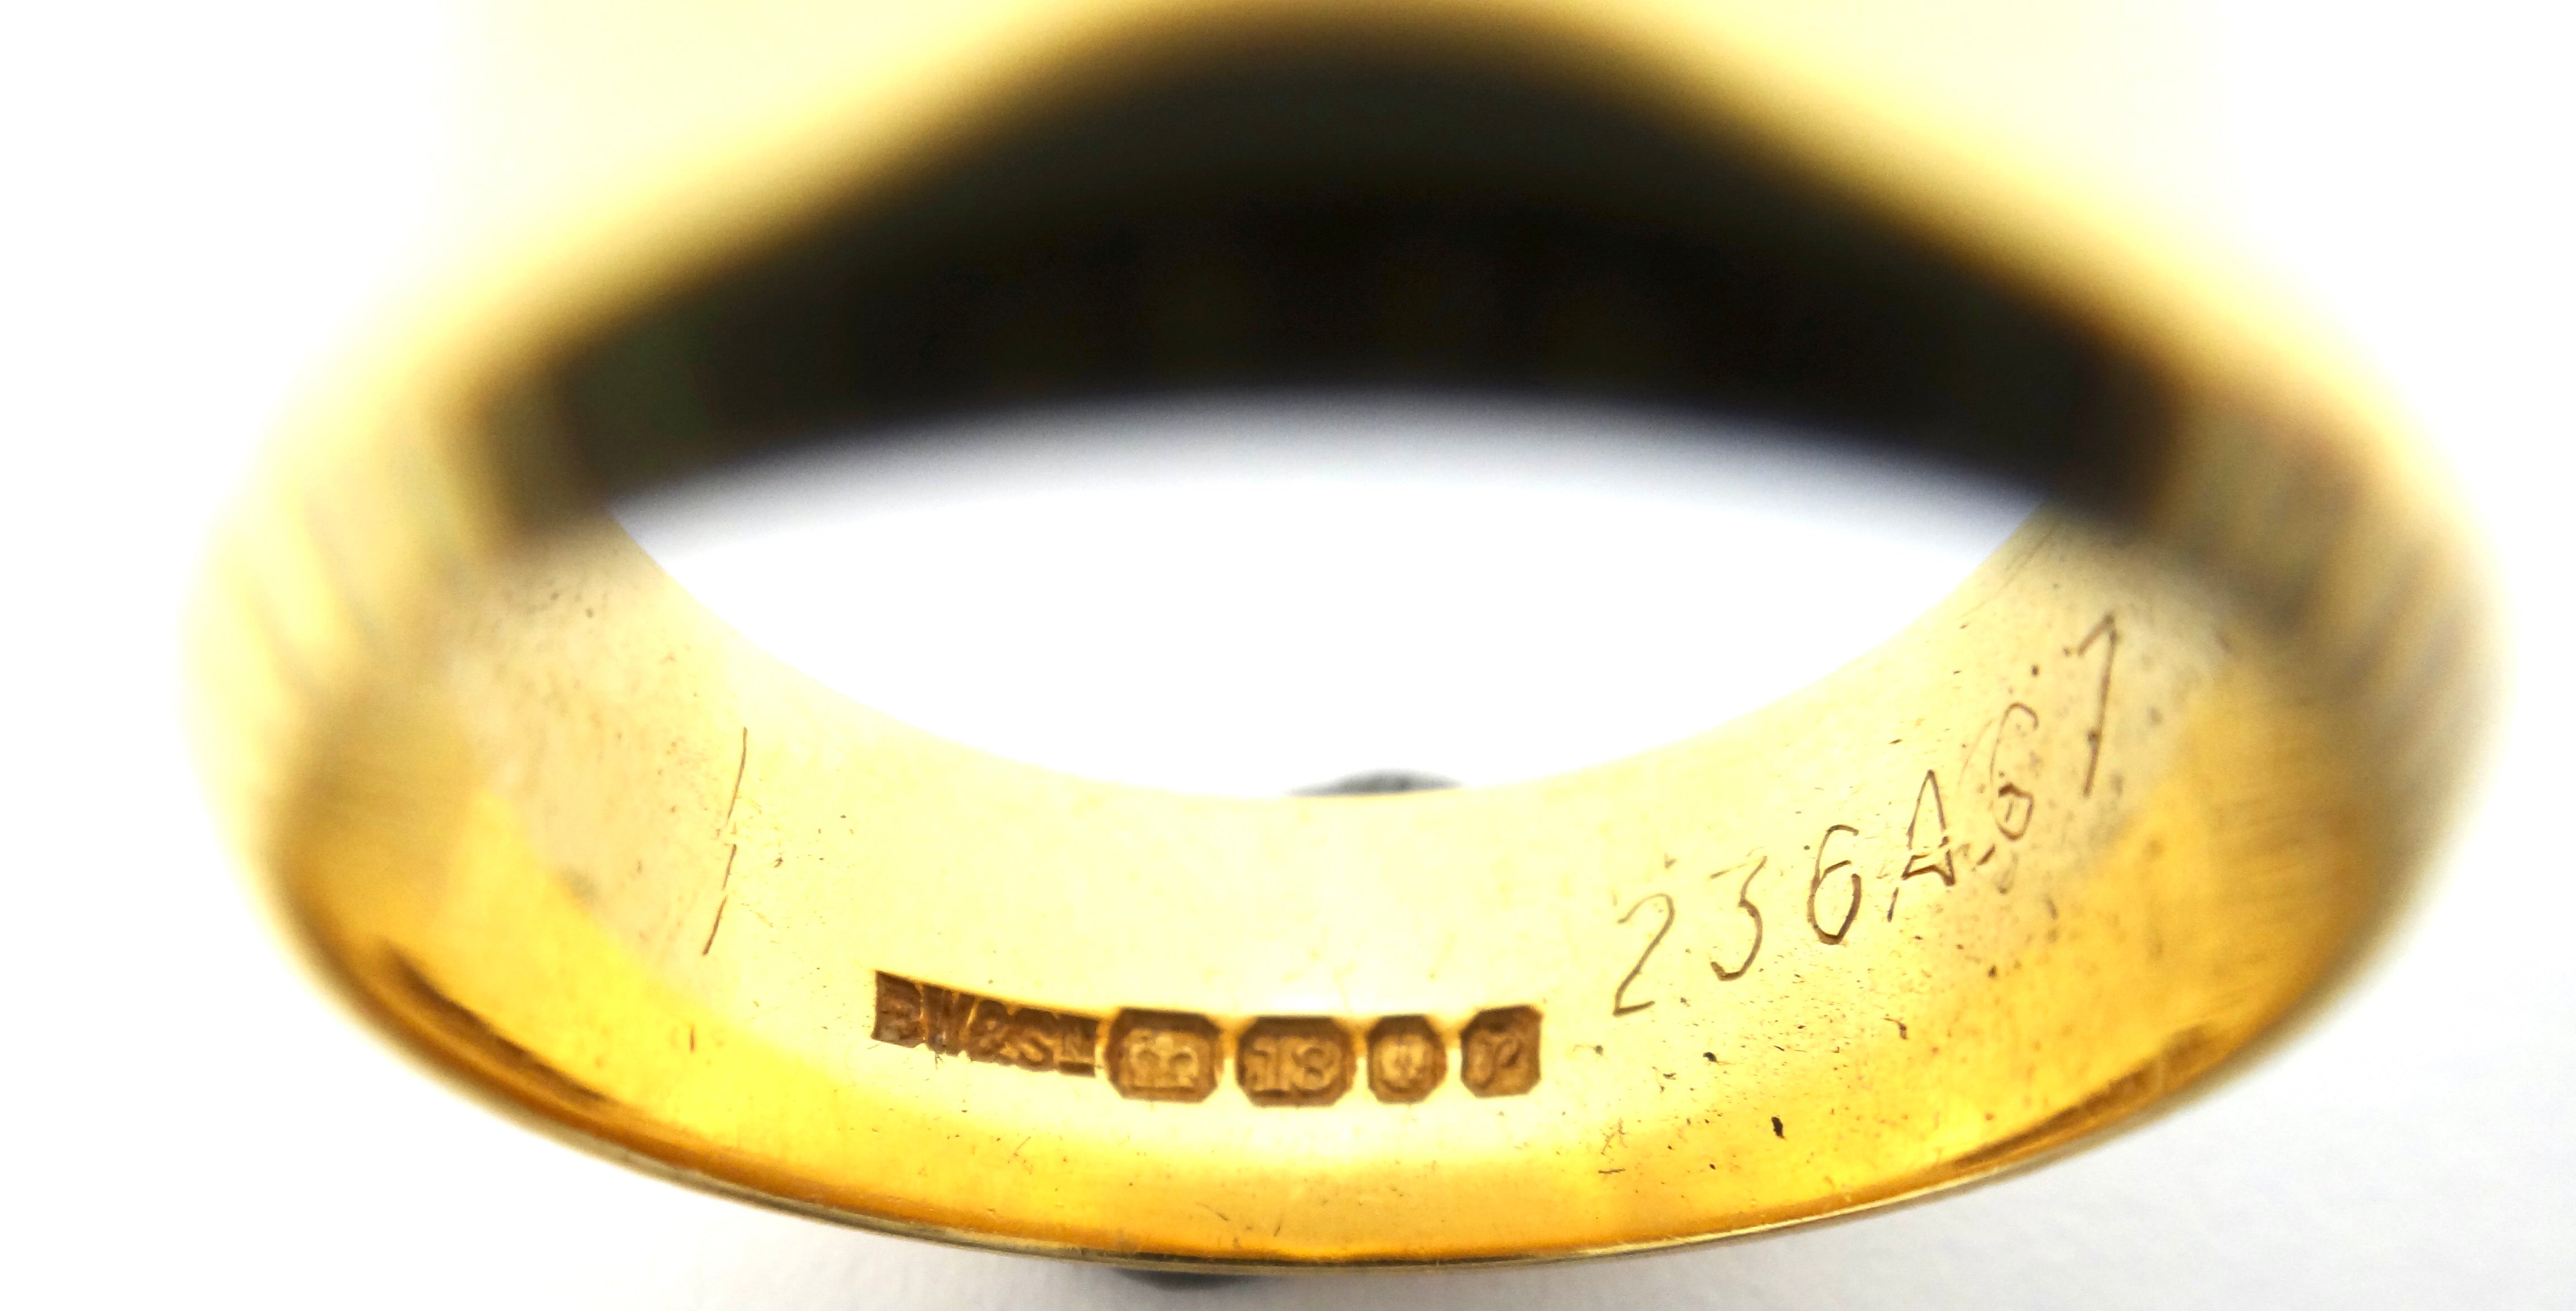 18CT Yellow GOLD Patterned Band Ring